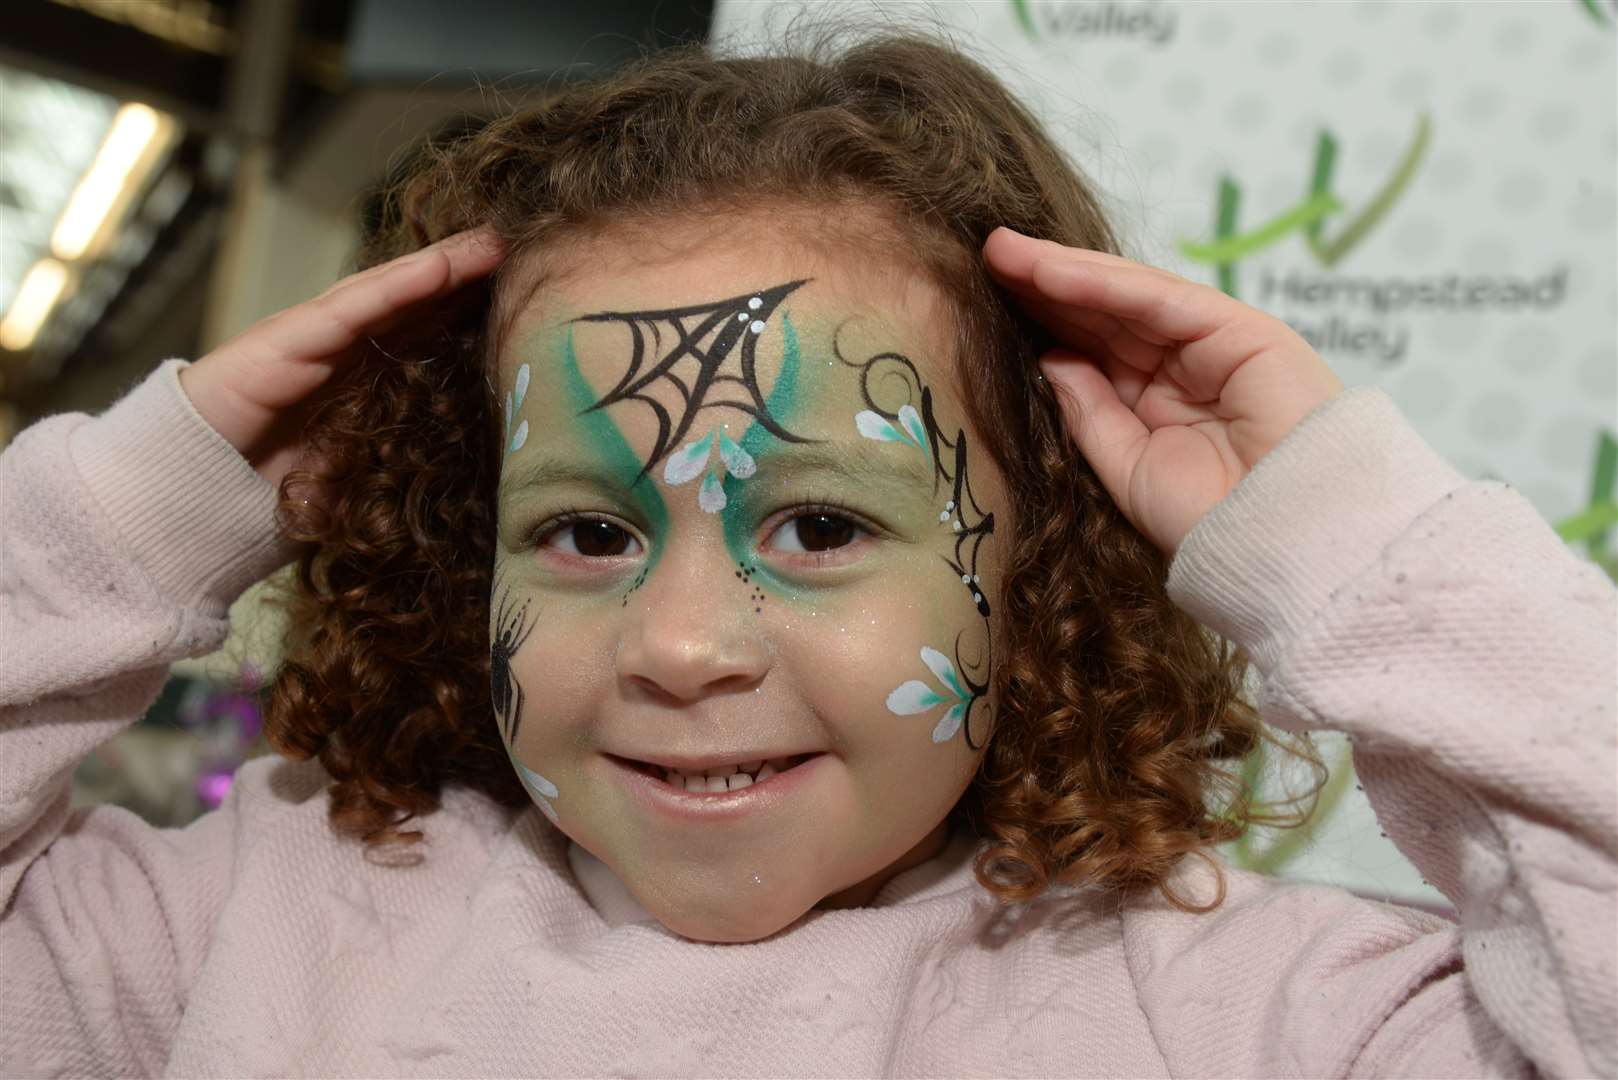 Enjoy the face painting at Hempstead Valley